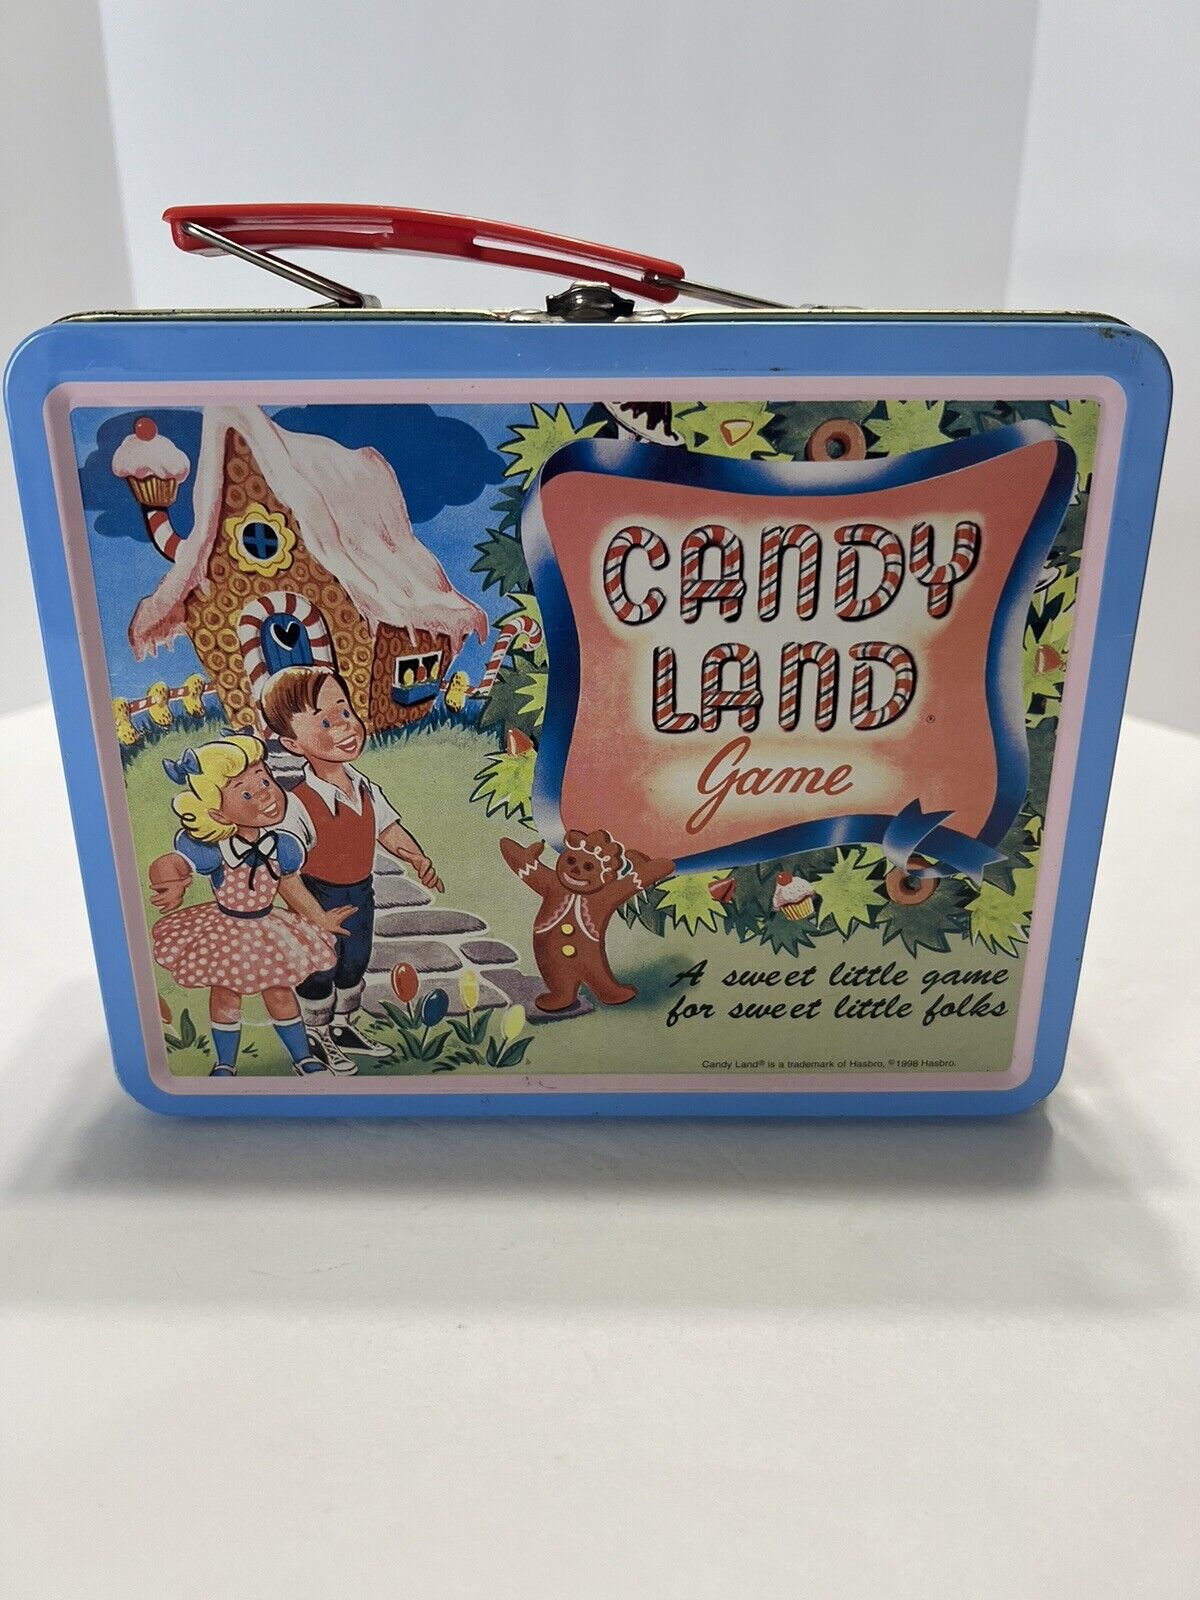 Vintage Style Hasbro 1998 Candy Land Game Tin Metal Lunch Box Mini Tote